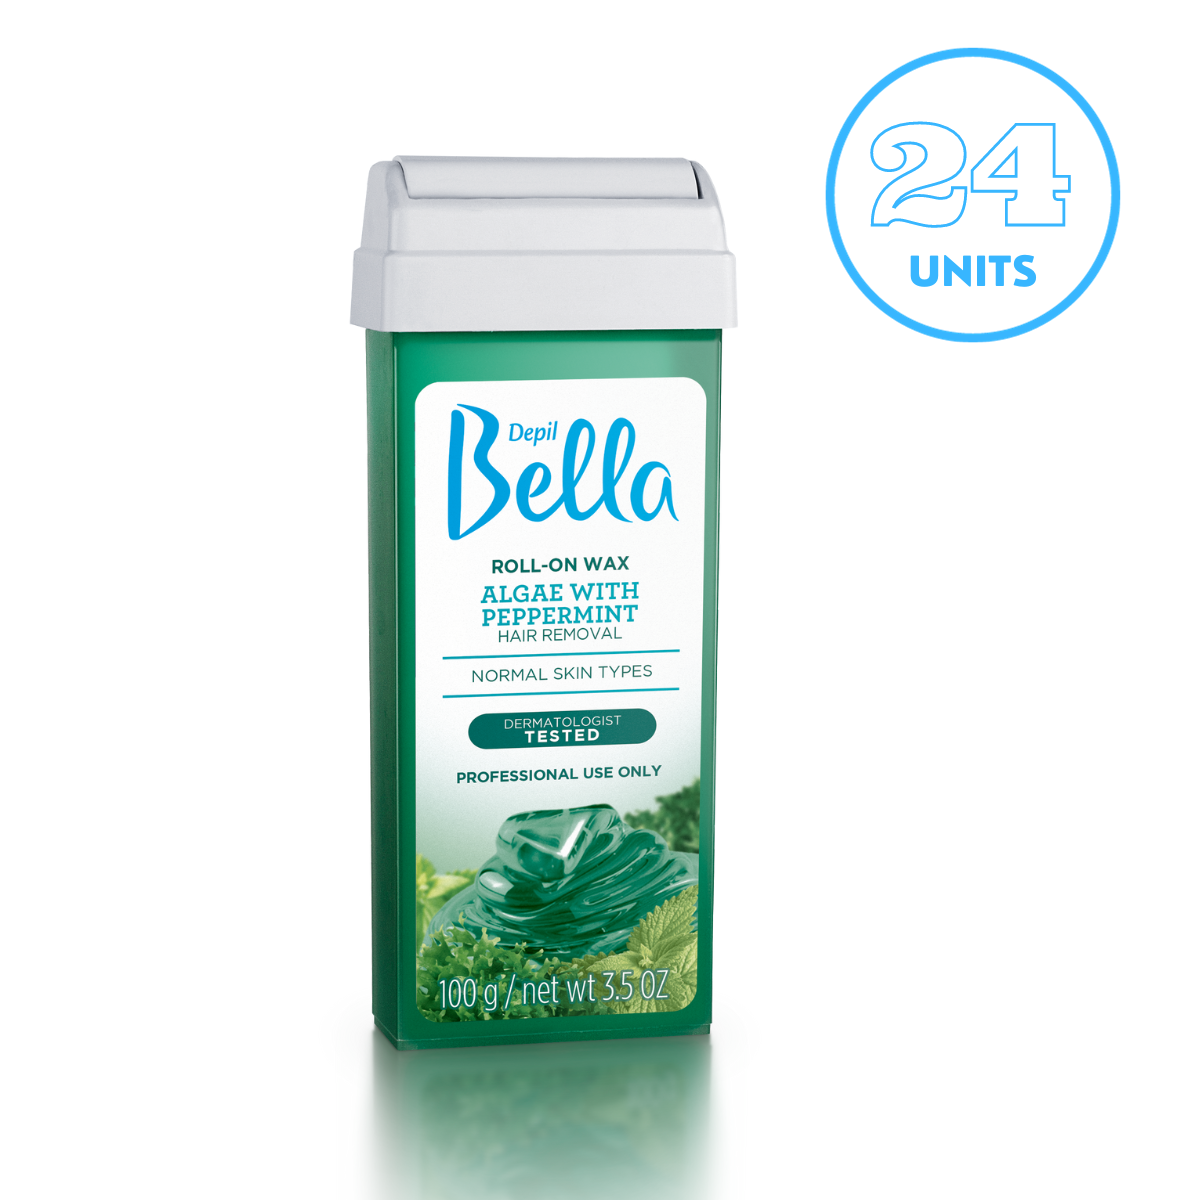 Depil Bella Algae with Peppermint Roll-On Depilatory Wax, 3.52oz (24 Units Offer) - Buy professional cosmetics dedicated to hair removal